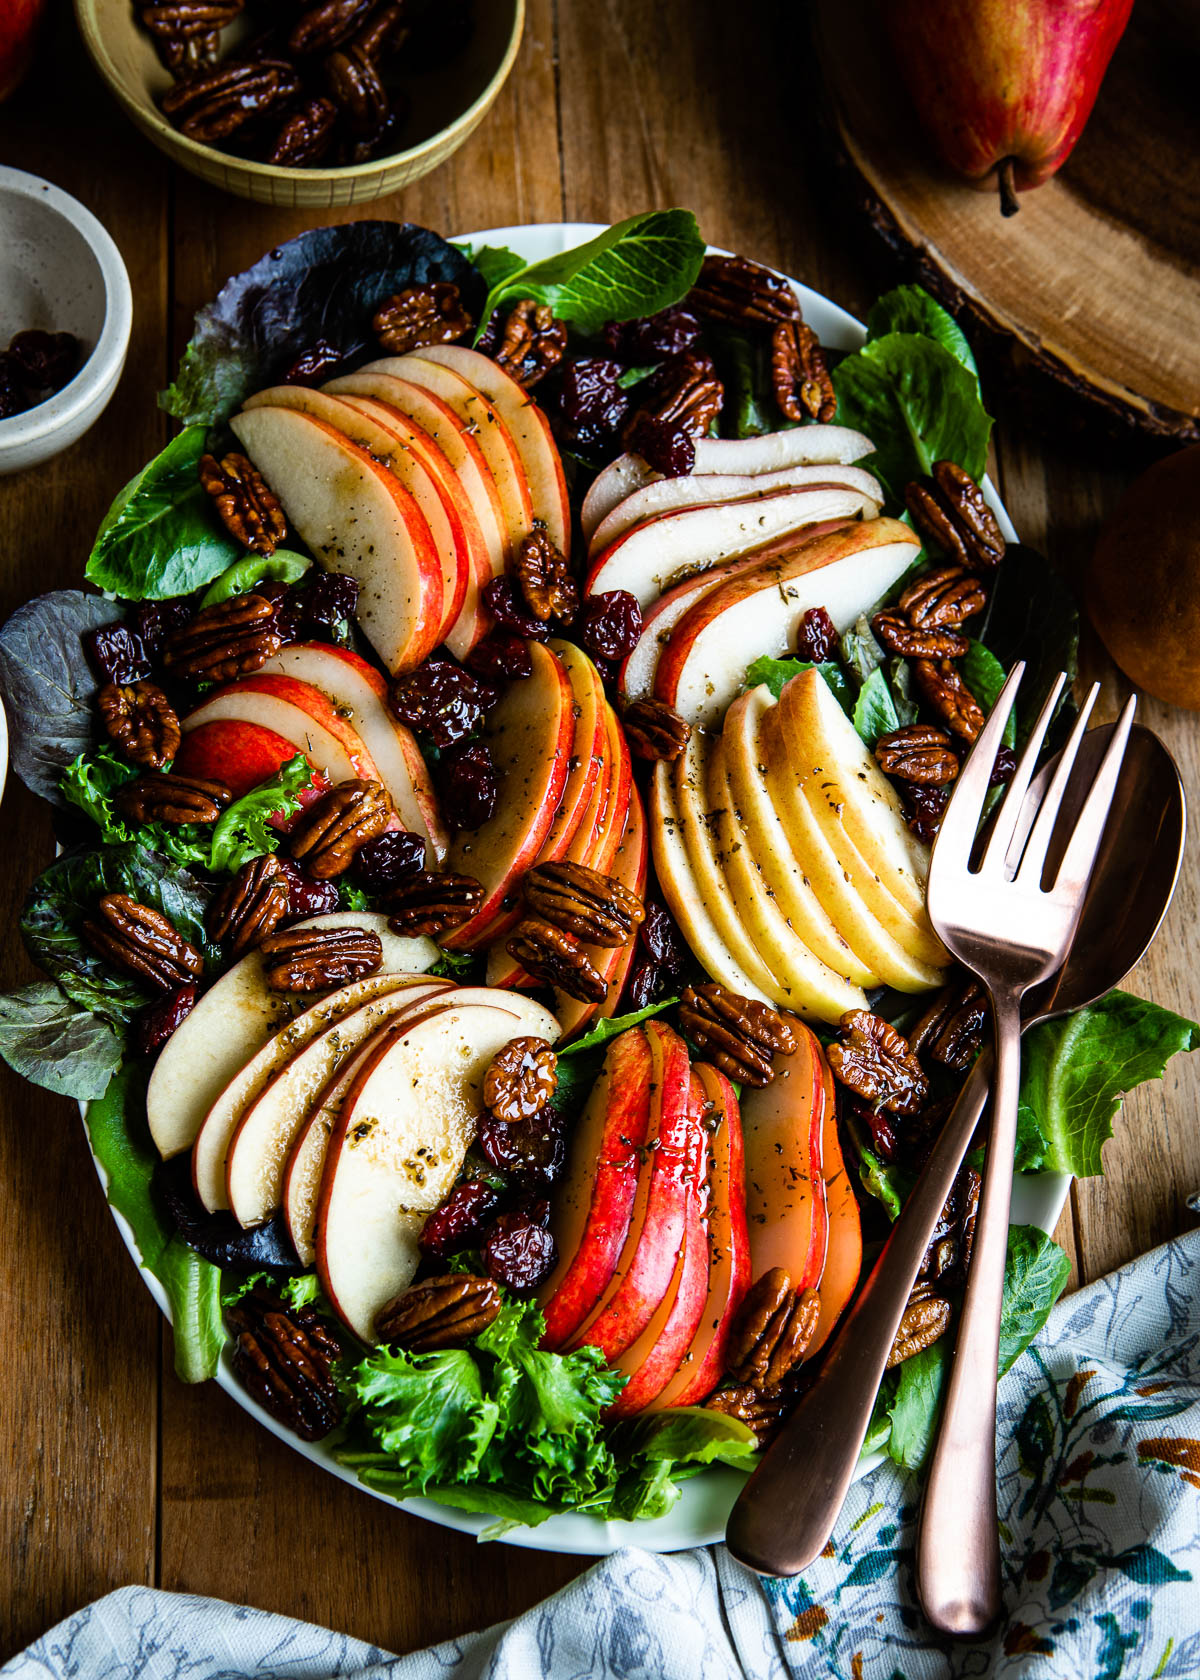 Autumn salad full of apples, pears, dried cherries, candied pecans, mixed greens and an herby vinaigrette.